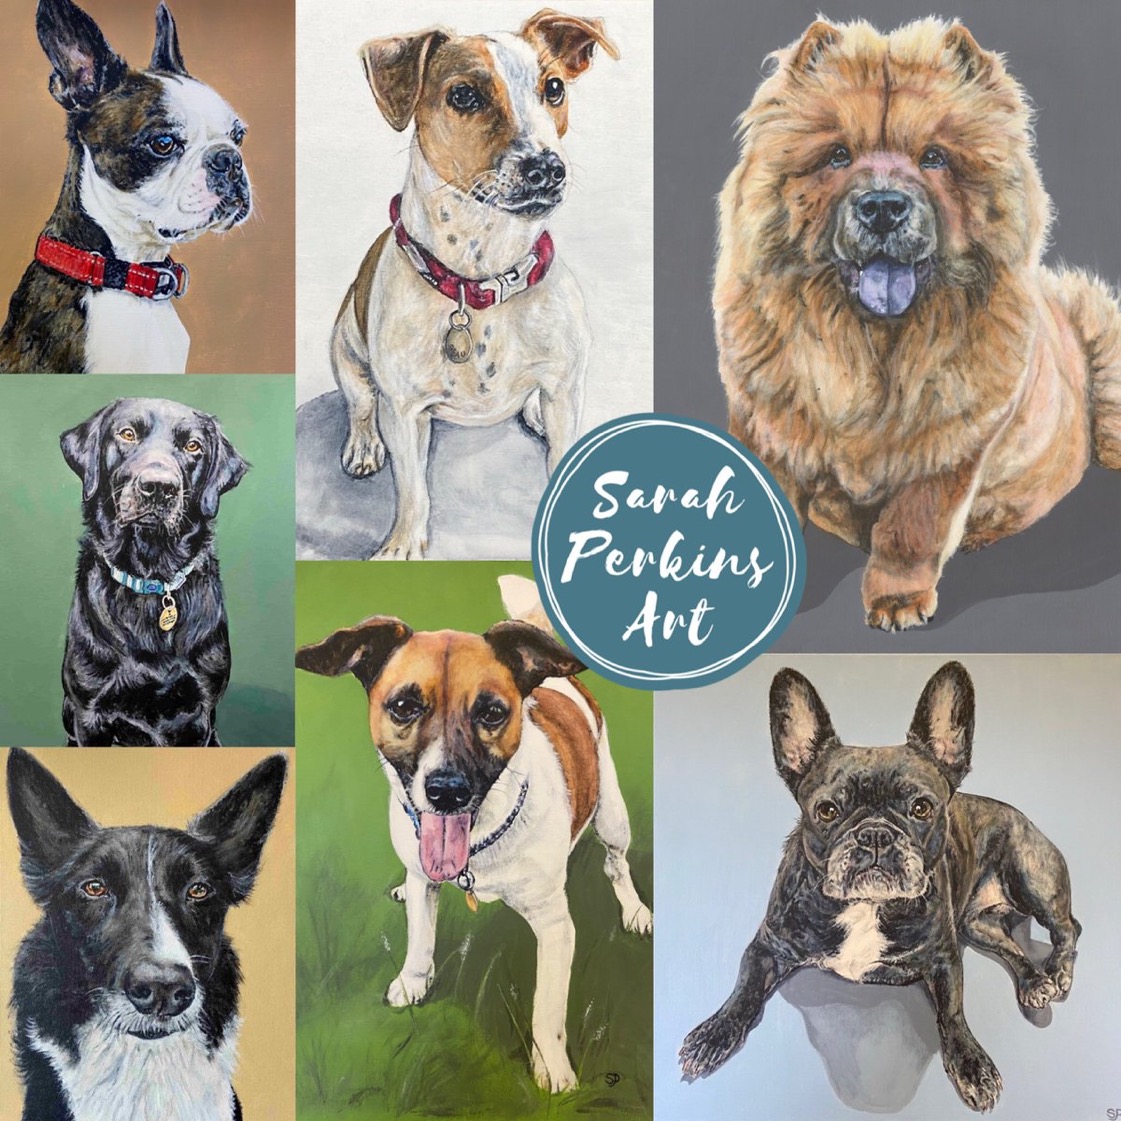 Immortalise a lifetime of love with a stunning #petportrait of your beloved #dog @SarahPerkinsArt uses acrylics to capture the personality and character of your canine companion, creating a work of art that can be treasured forever dotty4paws.co.uk/businesses/lis… #Earlybiz